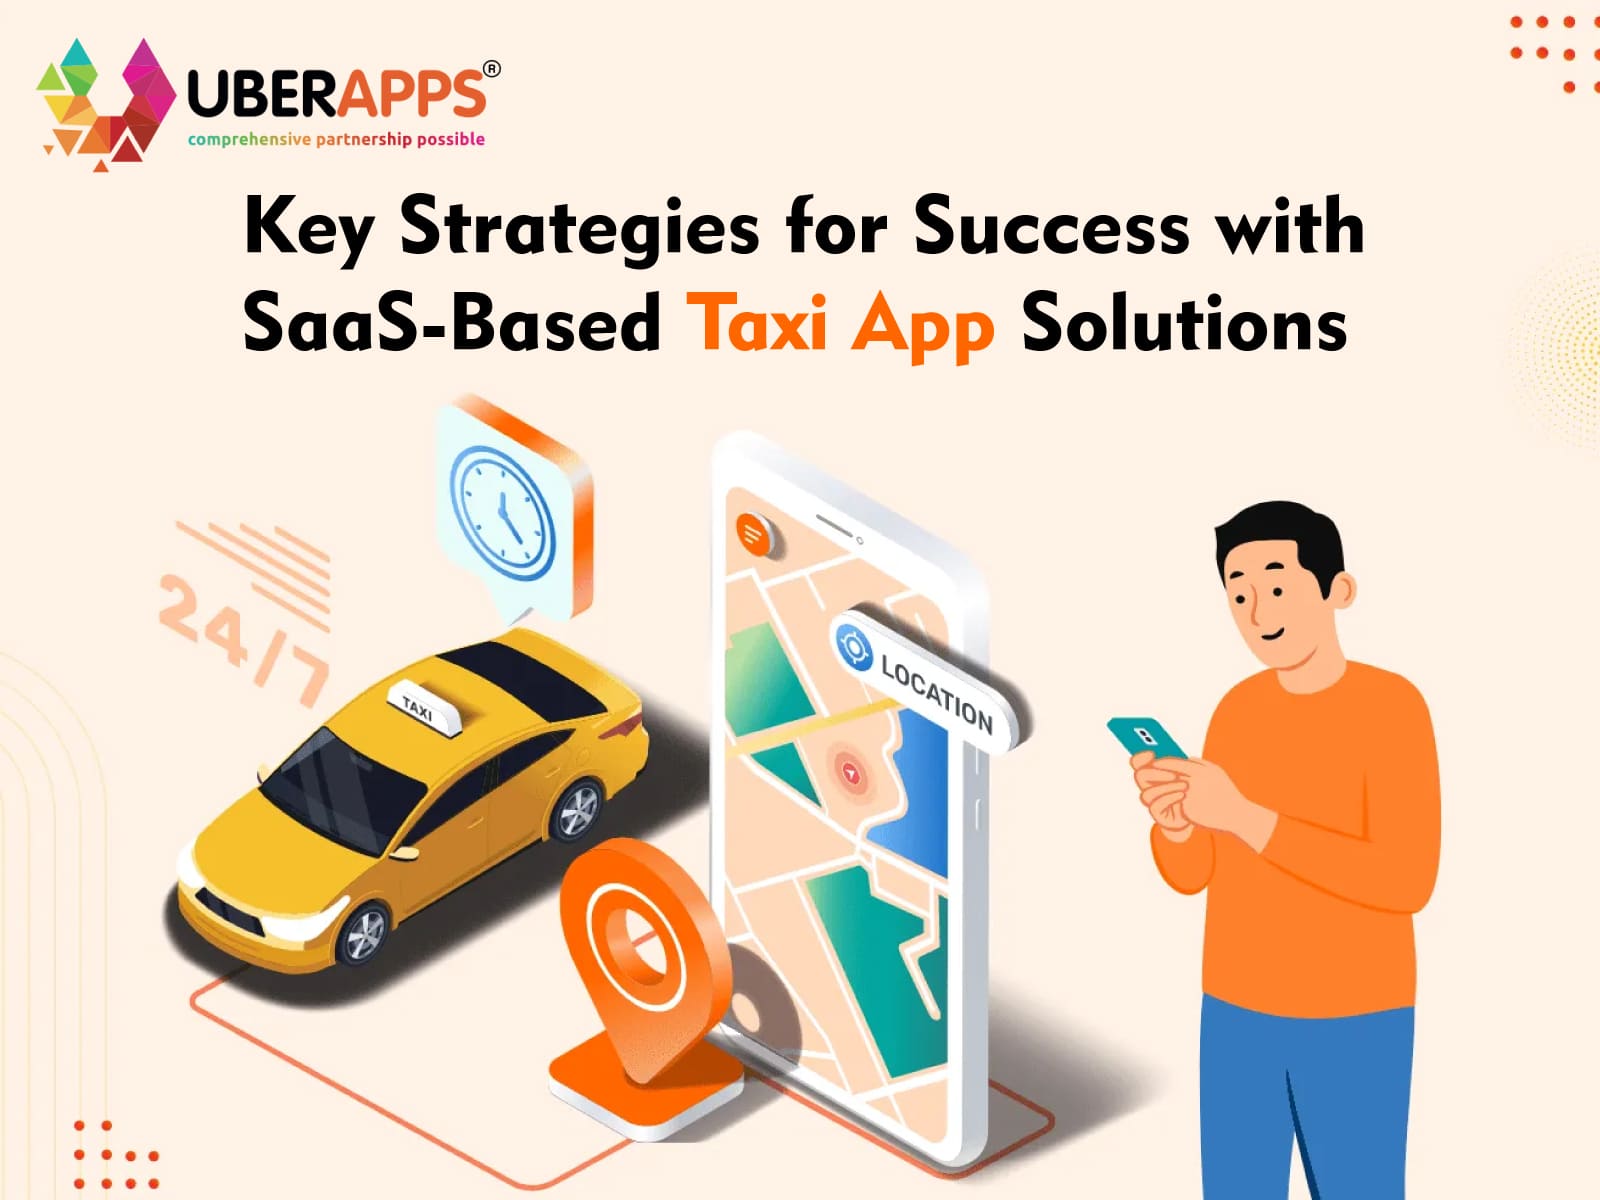 Key Strategies for Success with SaaS-Based Taxi App Solutions